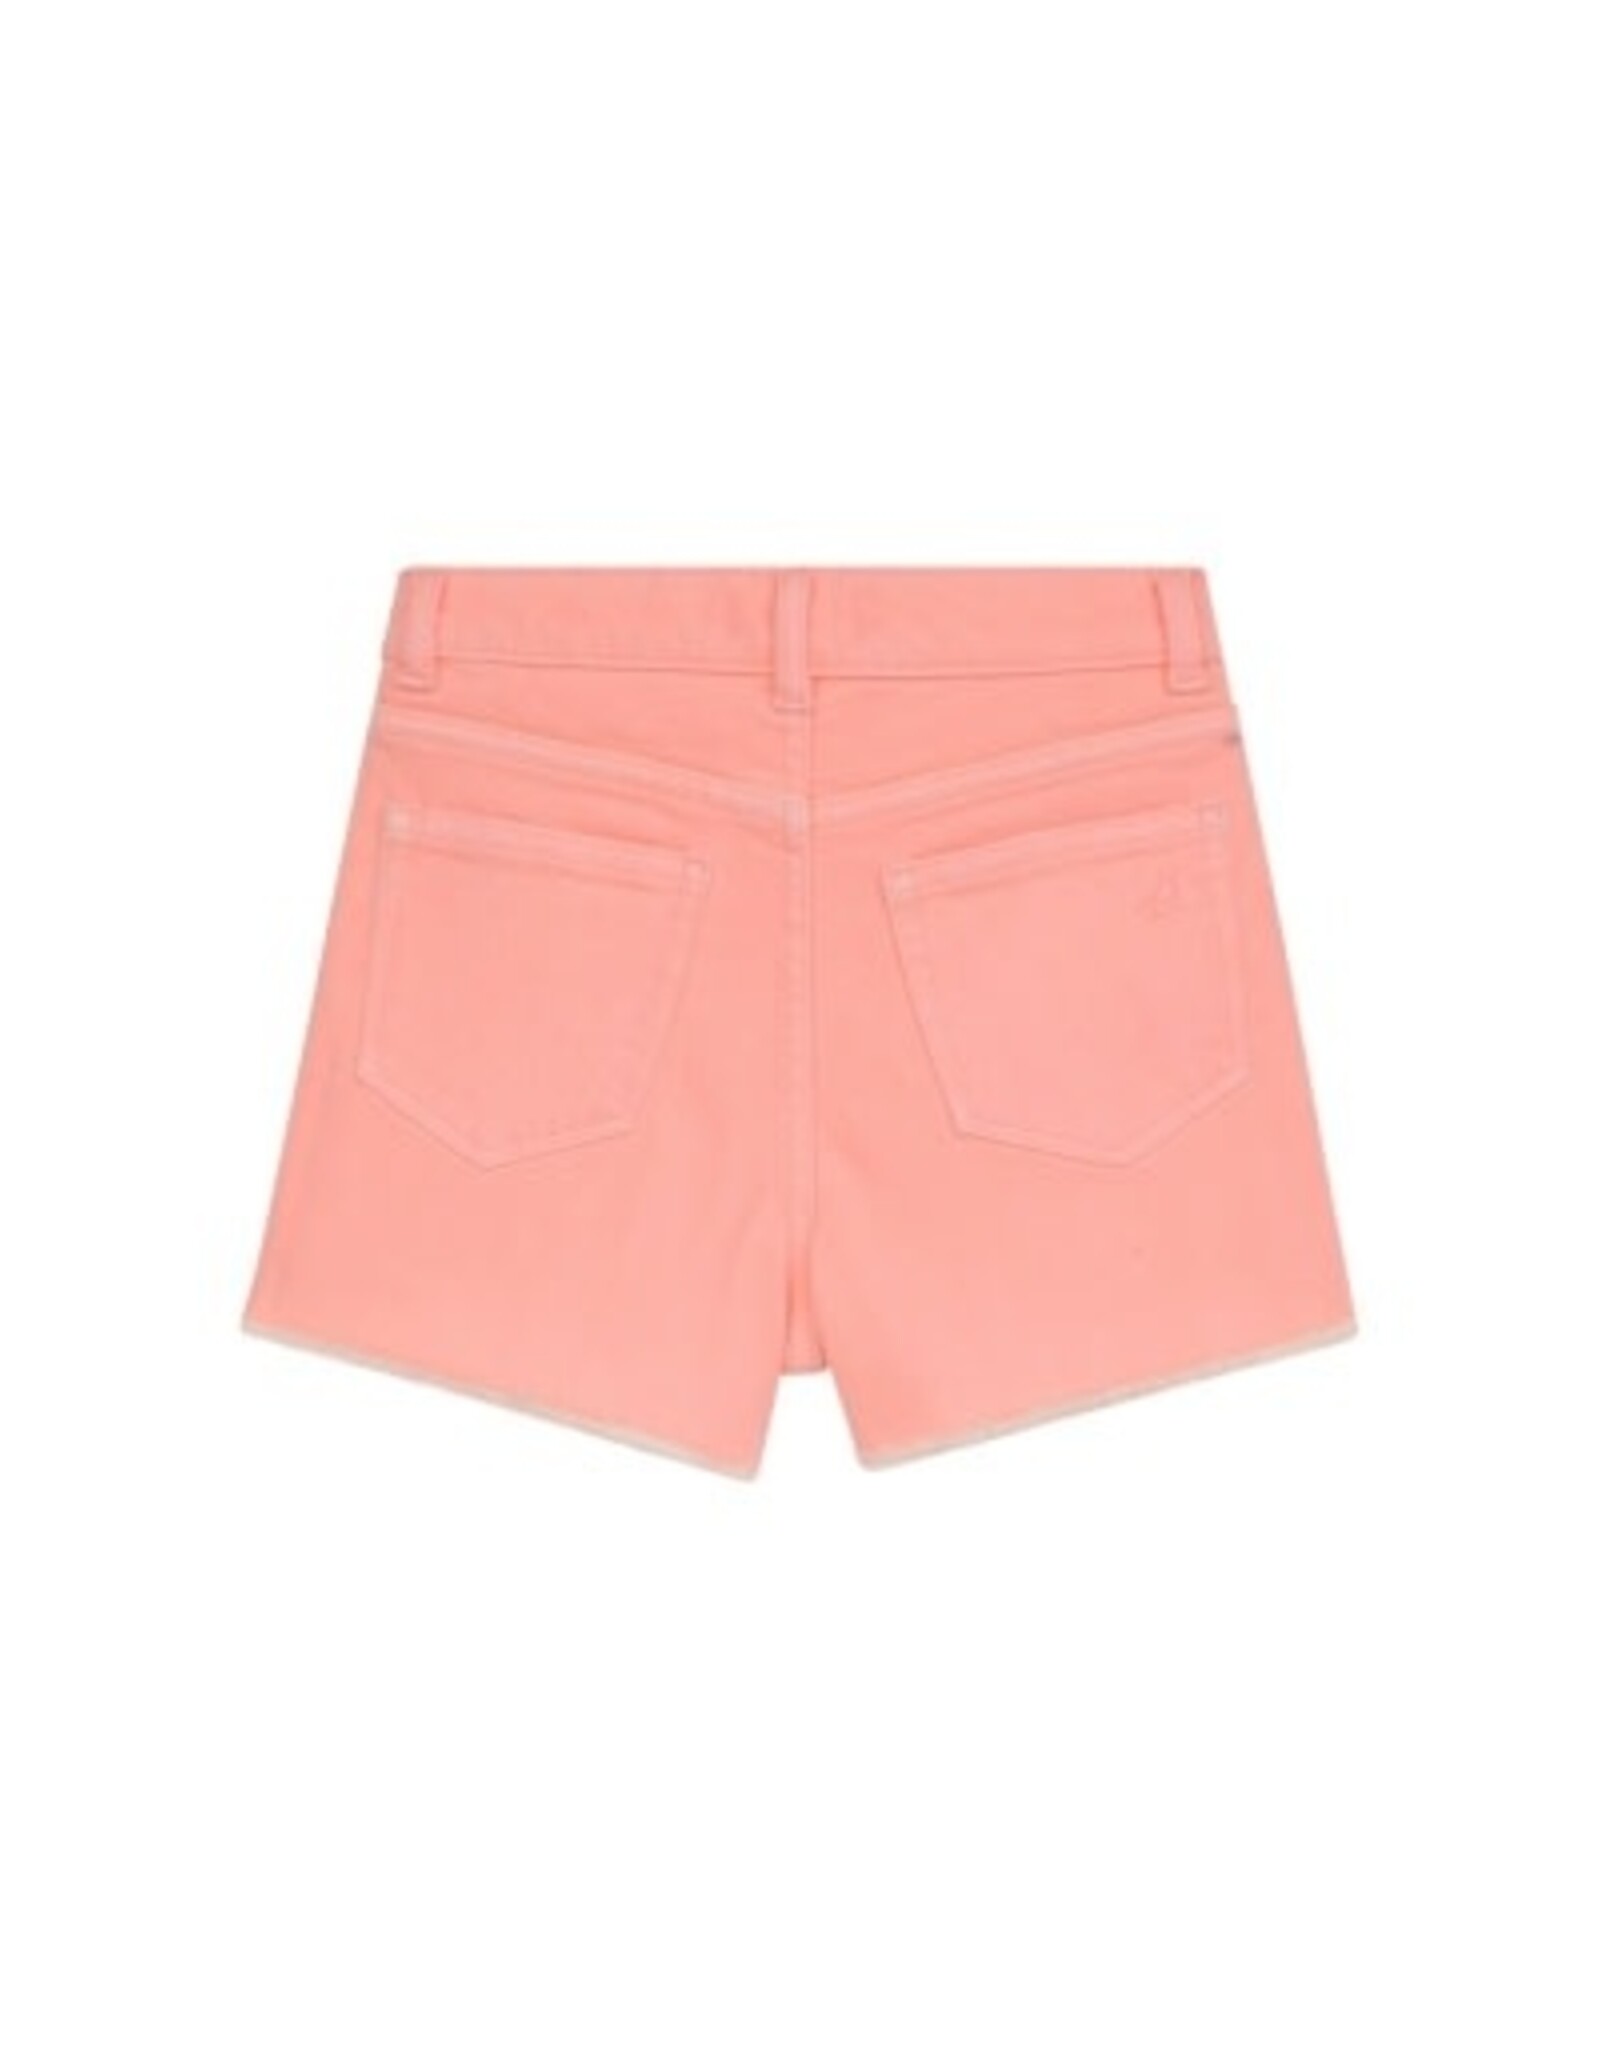 DL1961 Lucy High Rise Cut Off Shorts